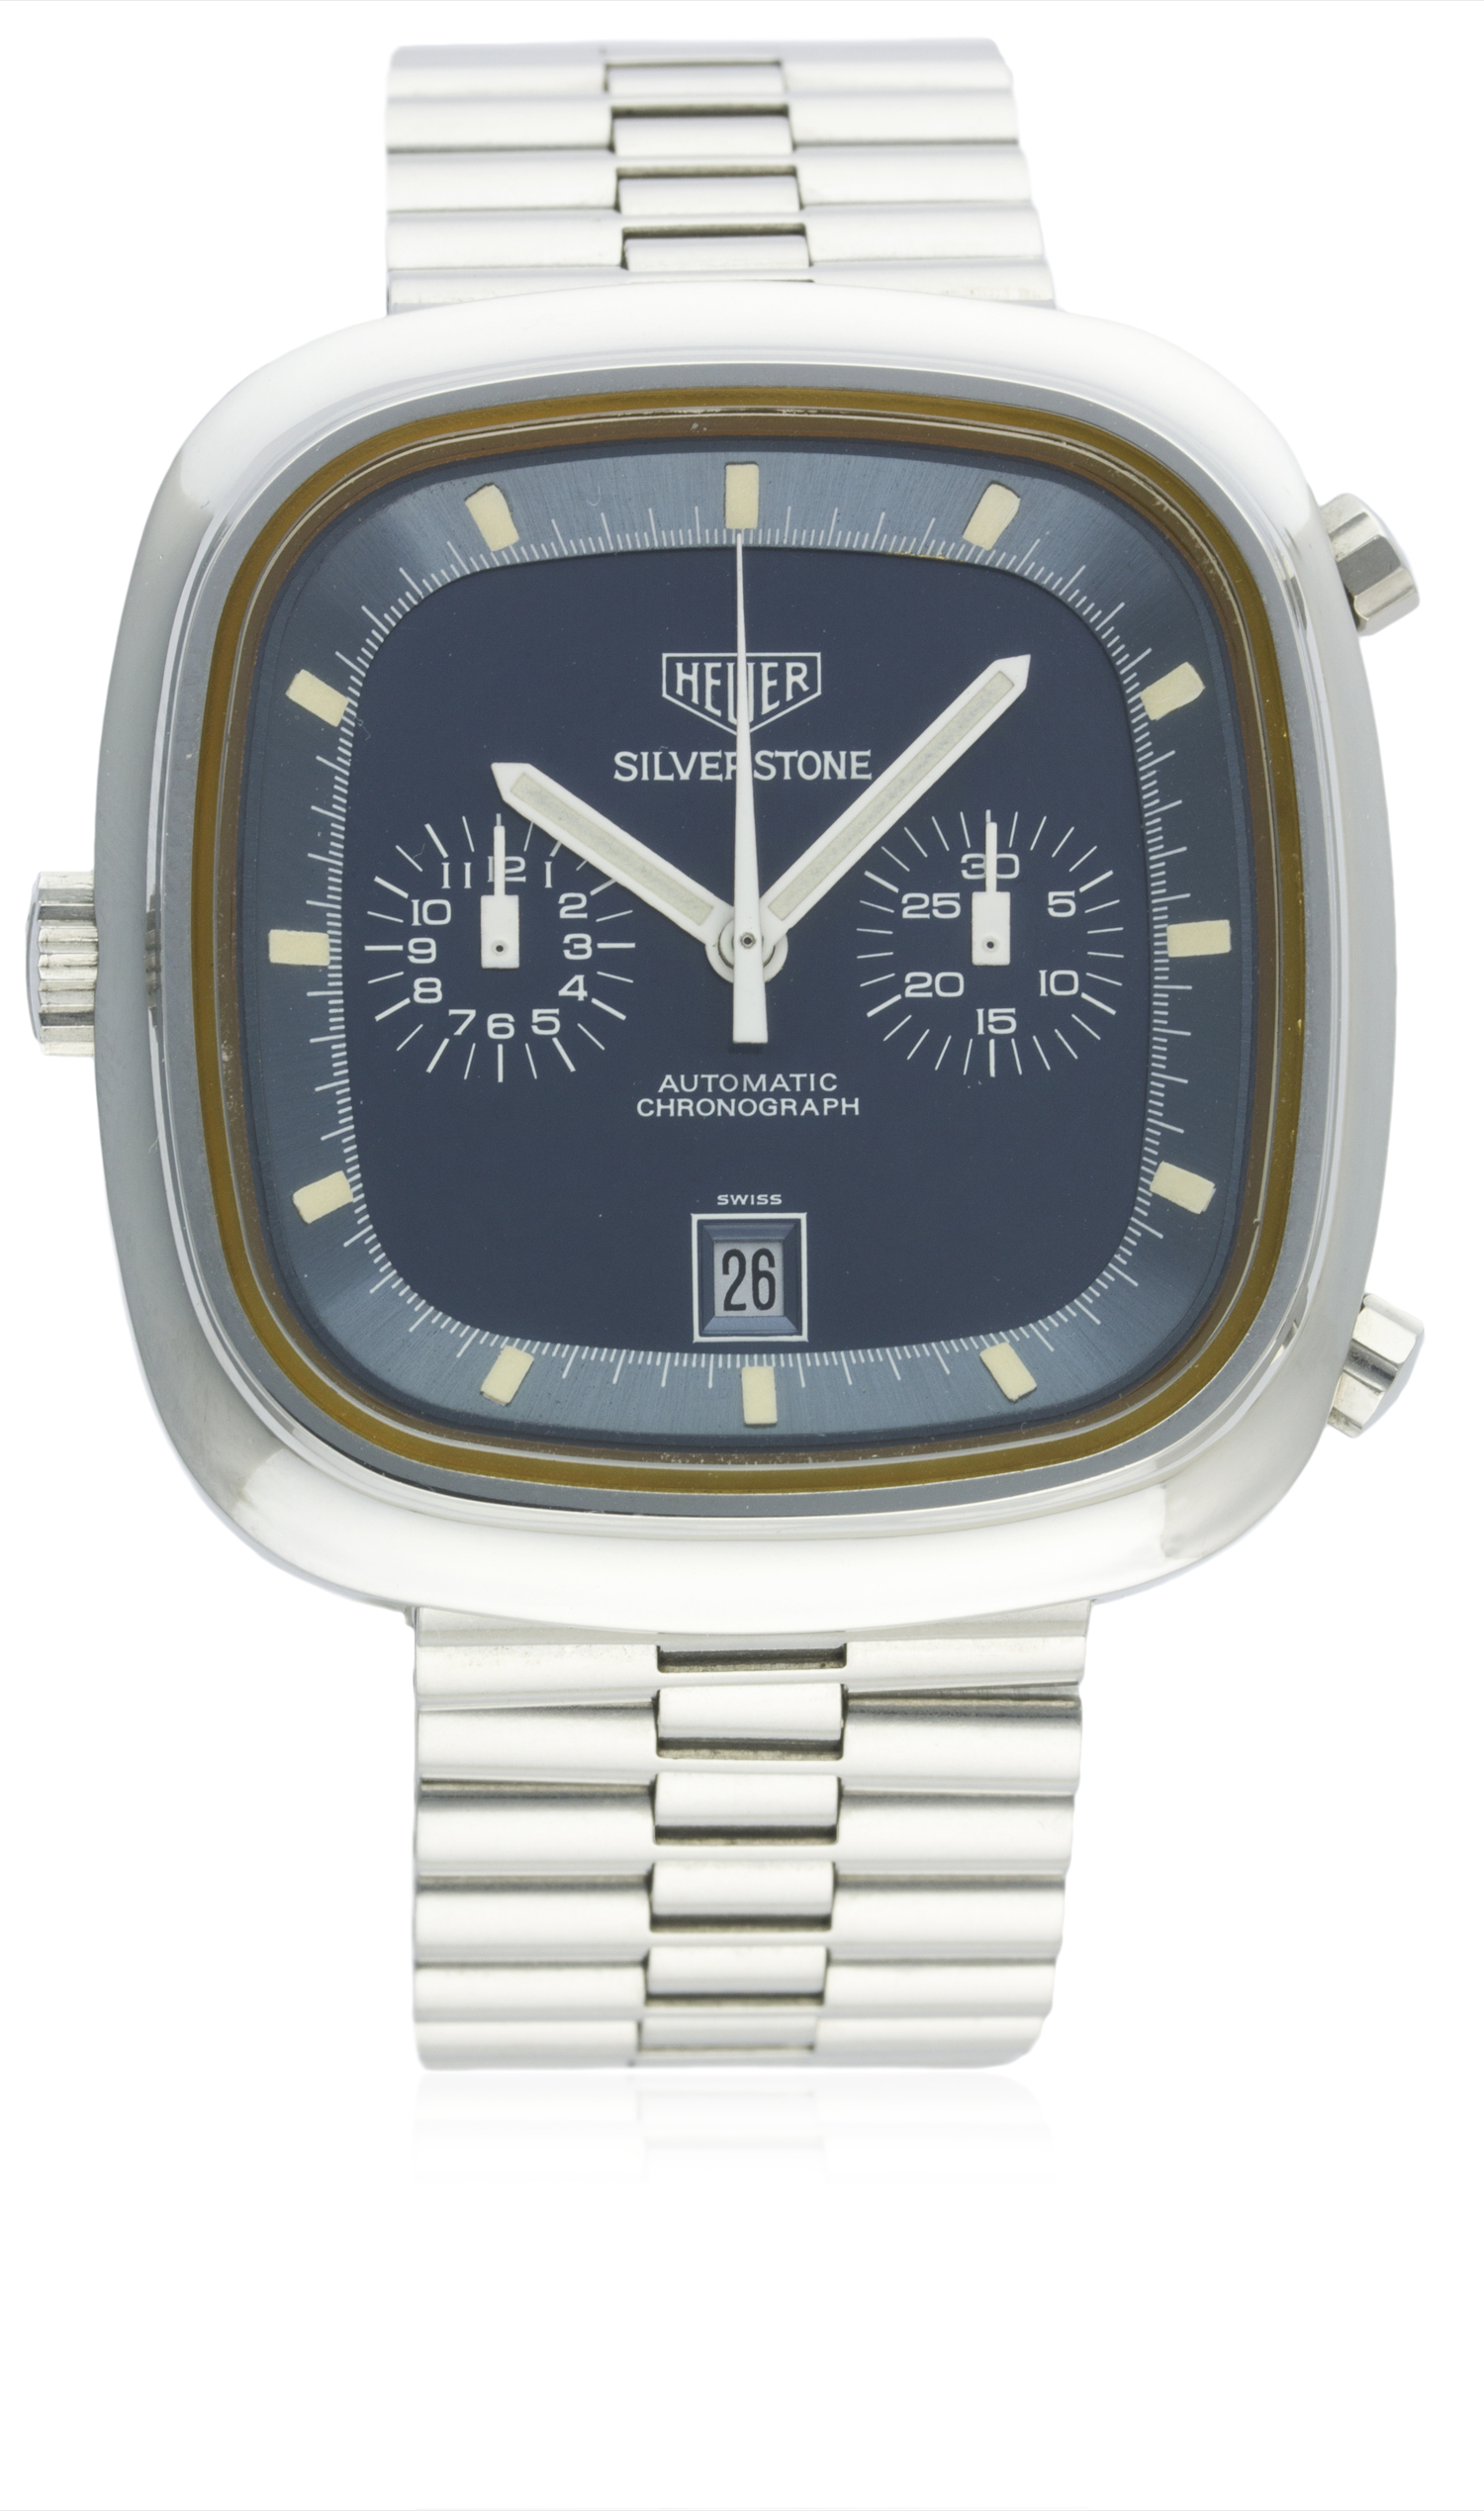 A RARE GENTLEMAN'S STAINLESS STEEL HEUER SILVERSTONE AUTOMATIC CHRONOGRAPH BRACELET WATCH CIRCA - Image 2 of 12